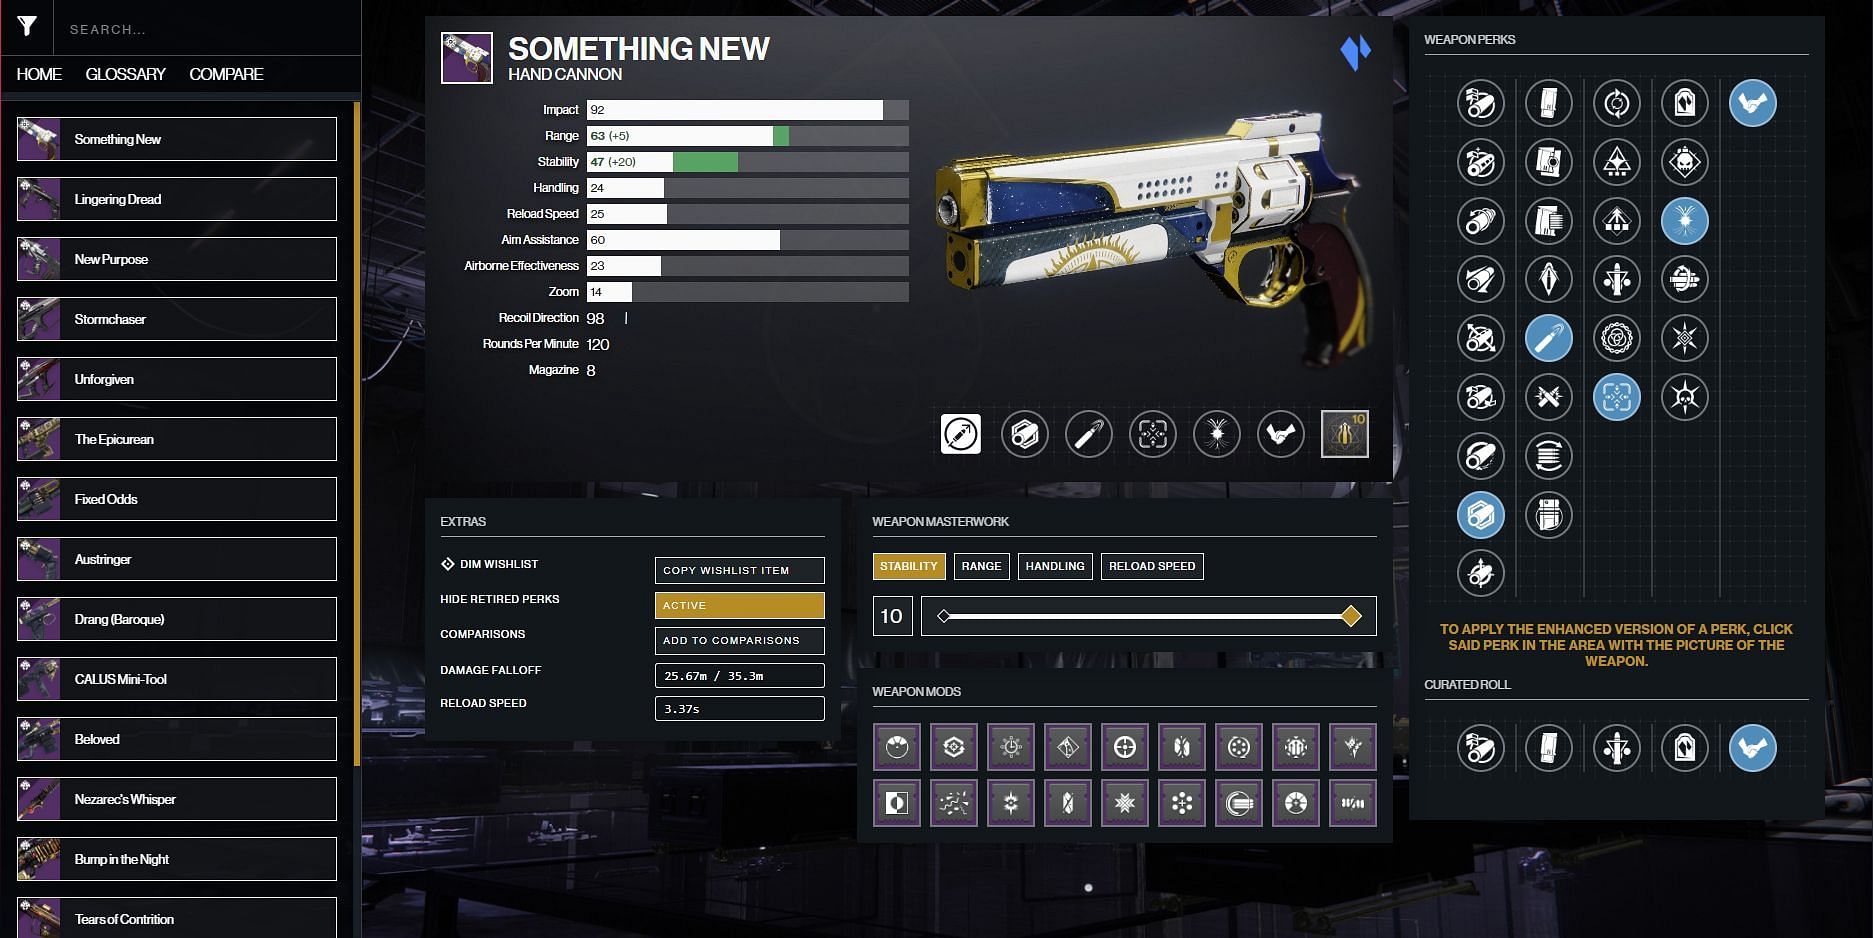 Something New god roll guide in Destiny 2 PvP and PvE